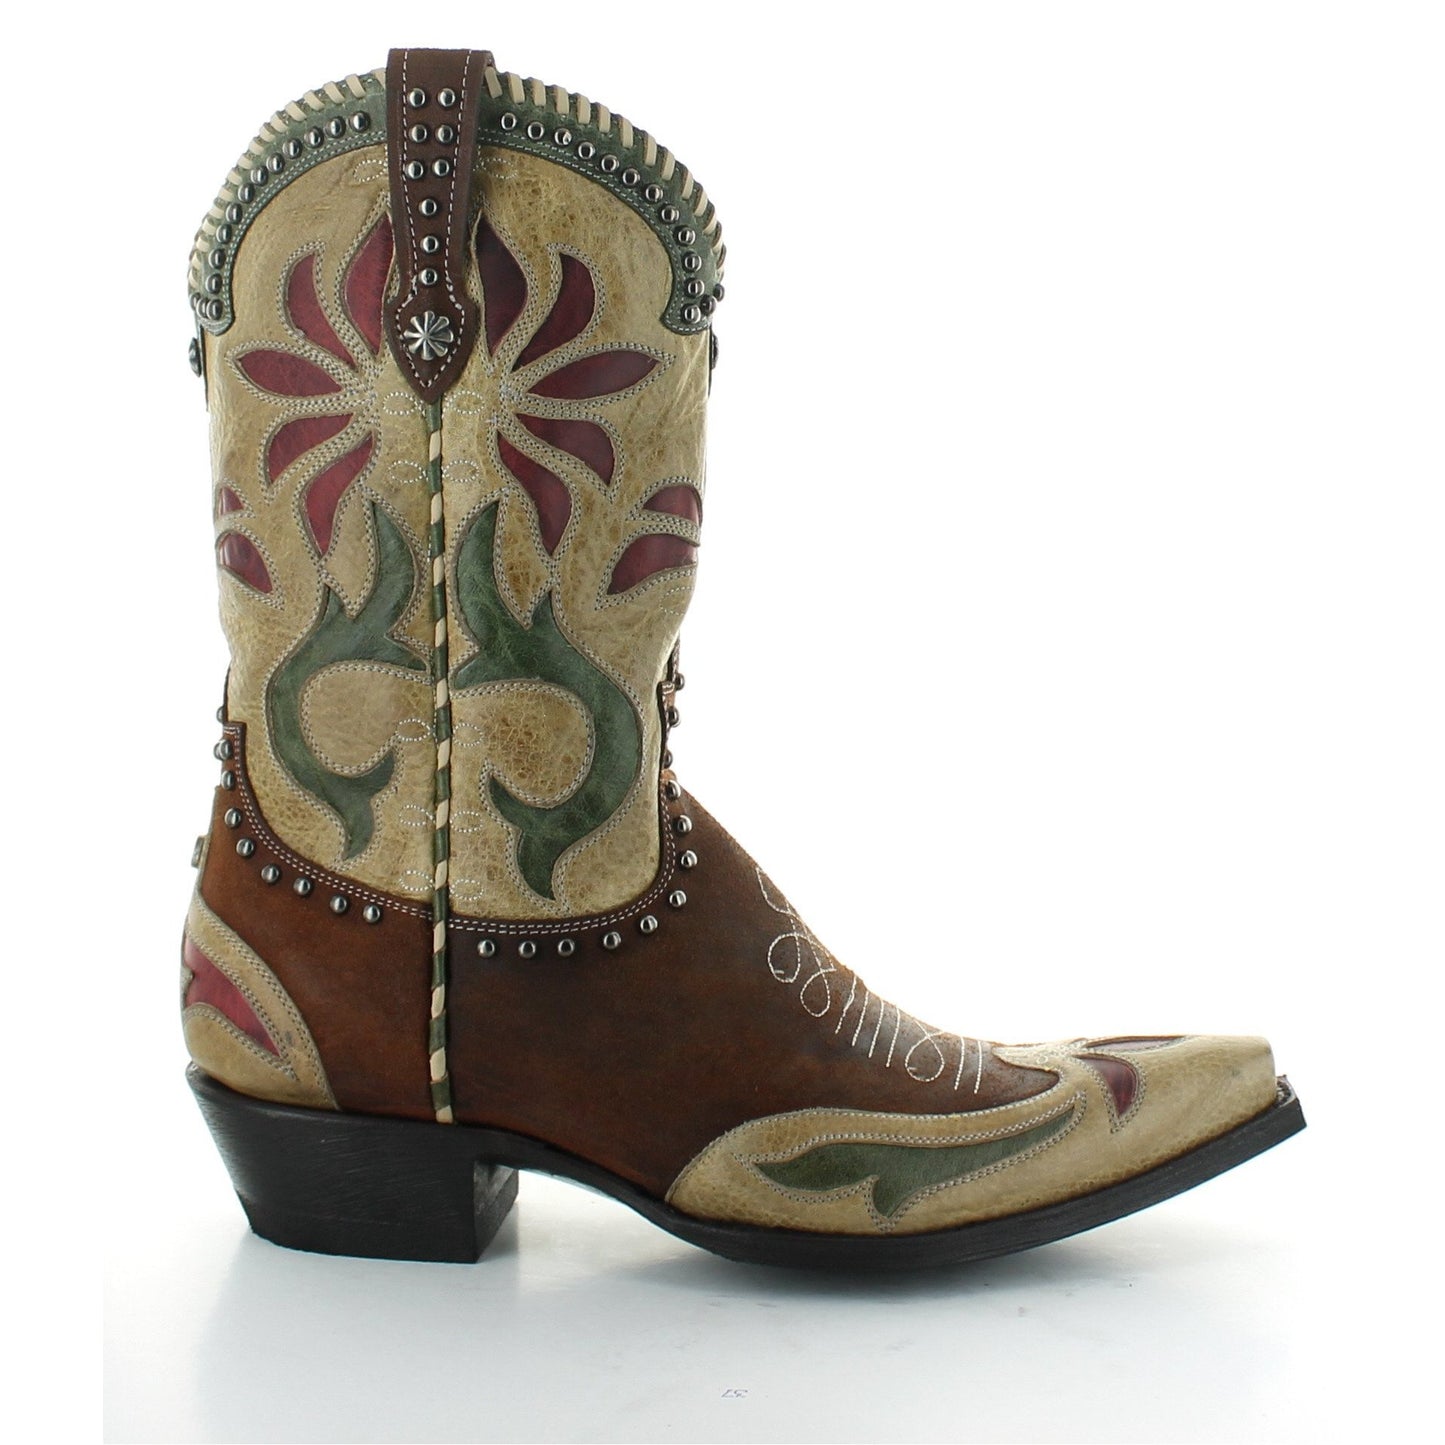 OLD GRINGO DOUBLE D RANCH "YELLOWSTONE" BOOTS